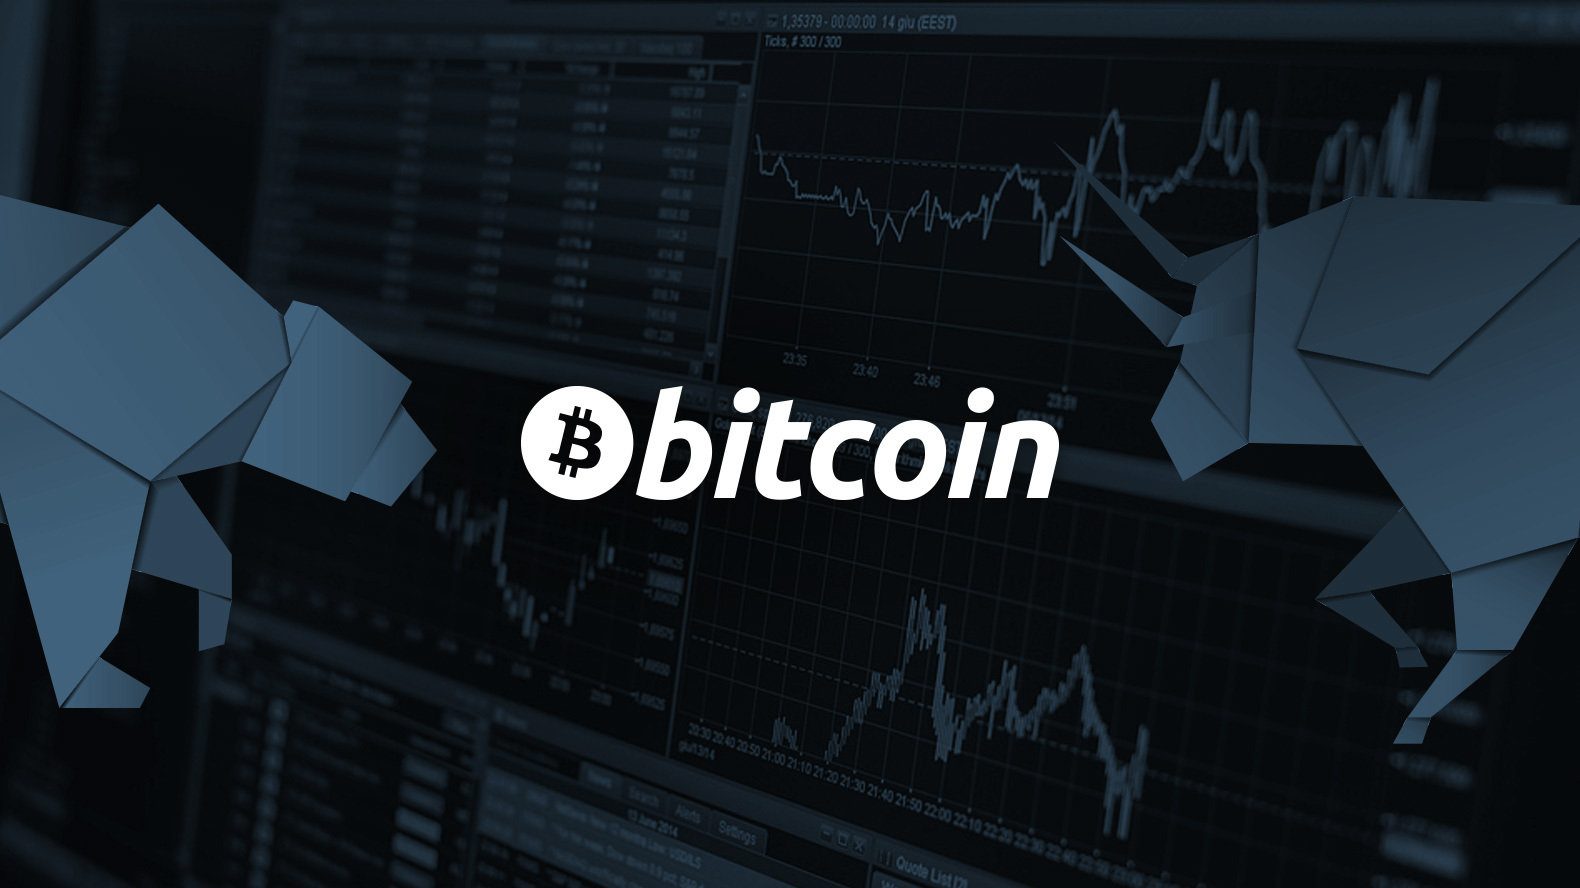 Bitcoin Price Analysis - BTC Rebounds at Crucial Support - Can We Break $8K?